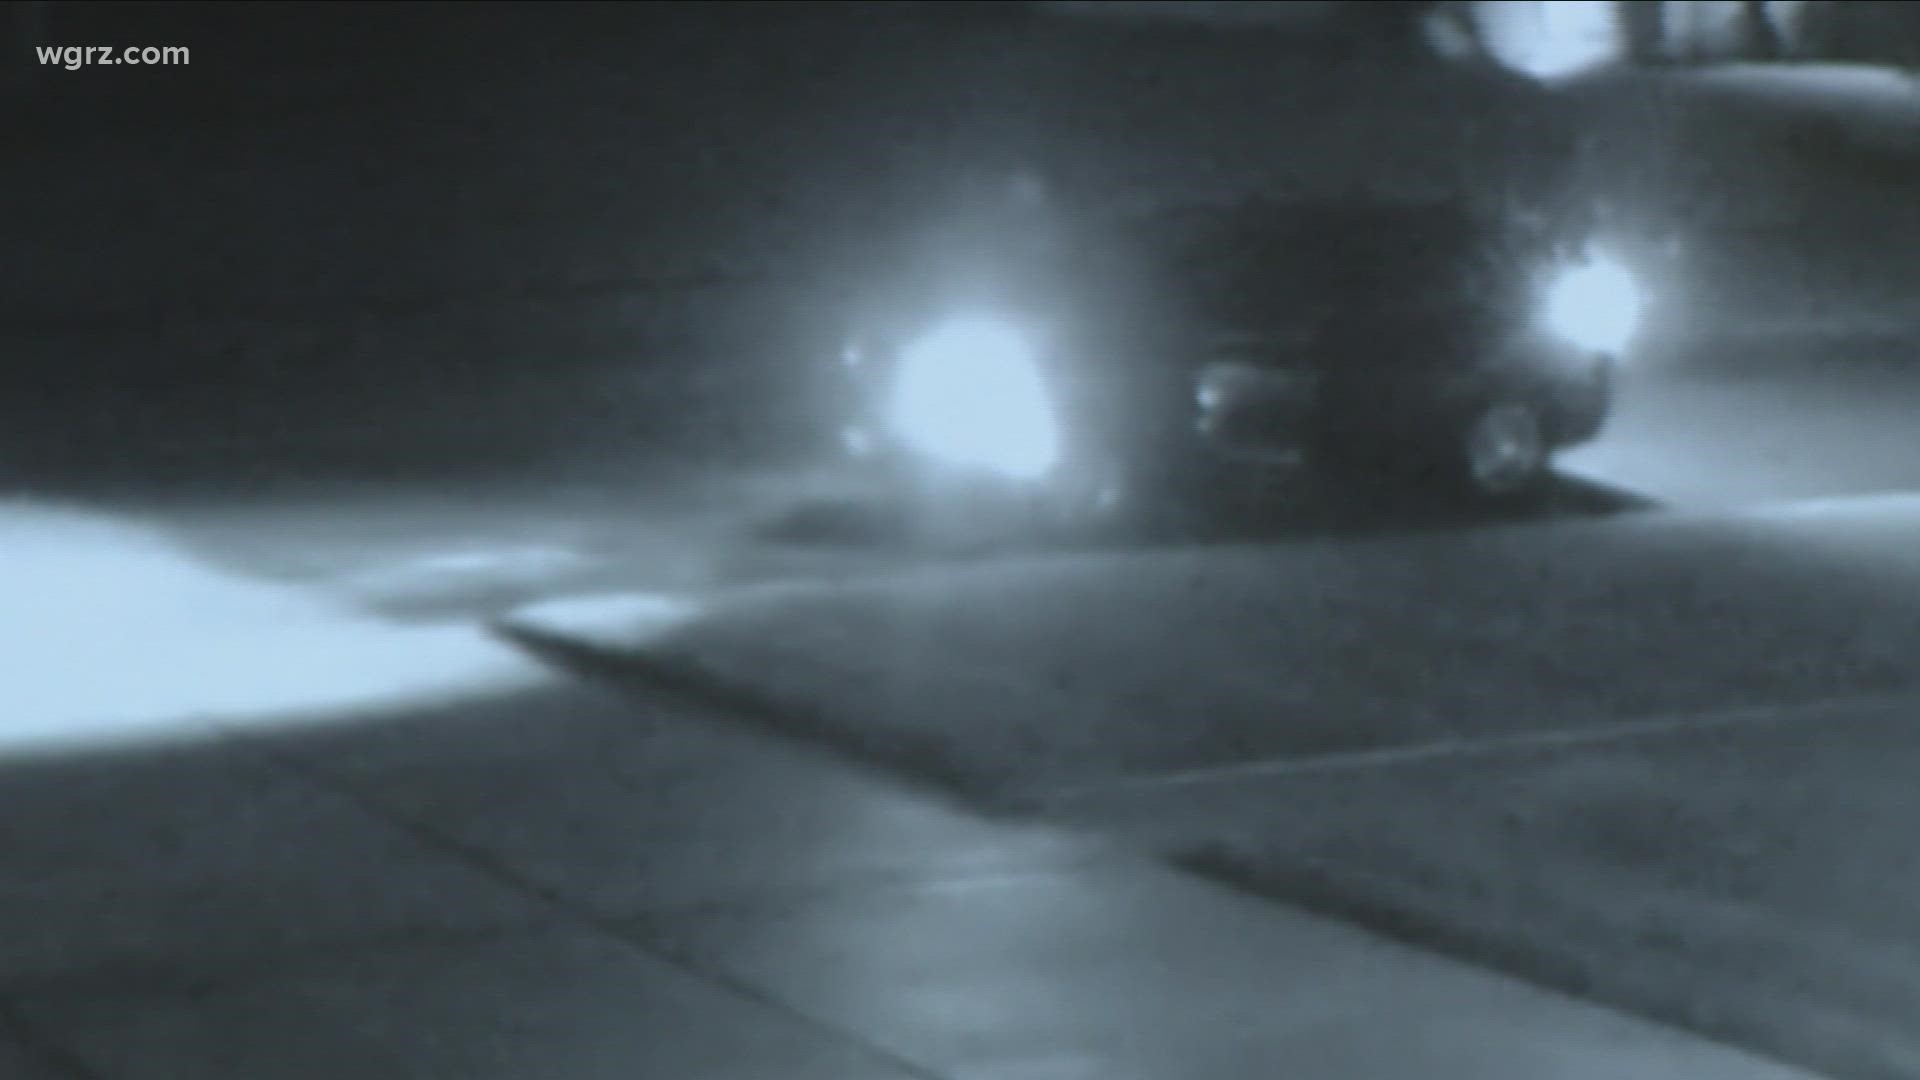 security video shows a vehicle approach a home on Hillbrook Drive and then an object is thrown at the house...